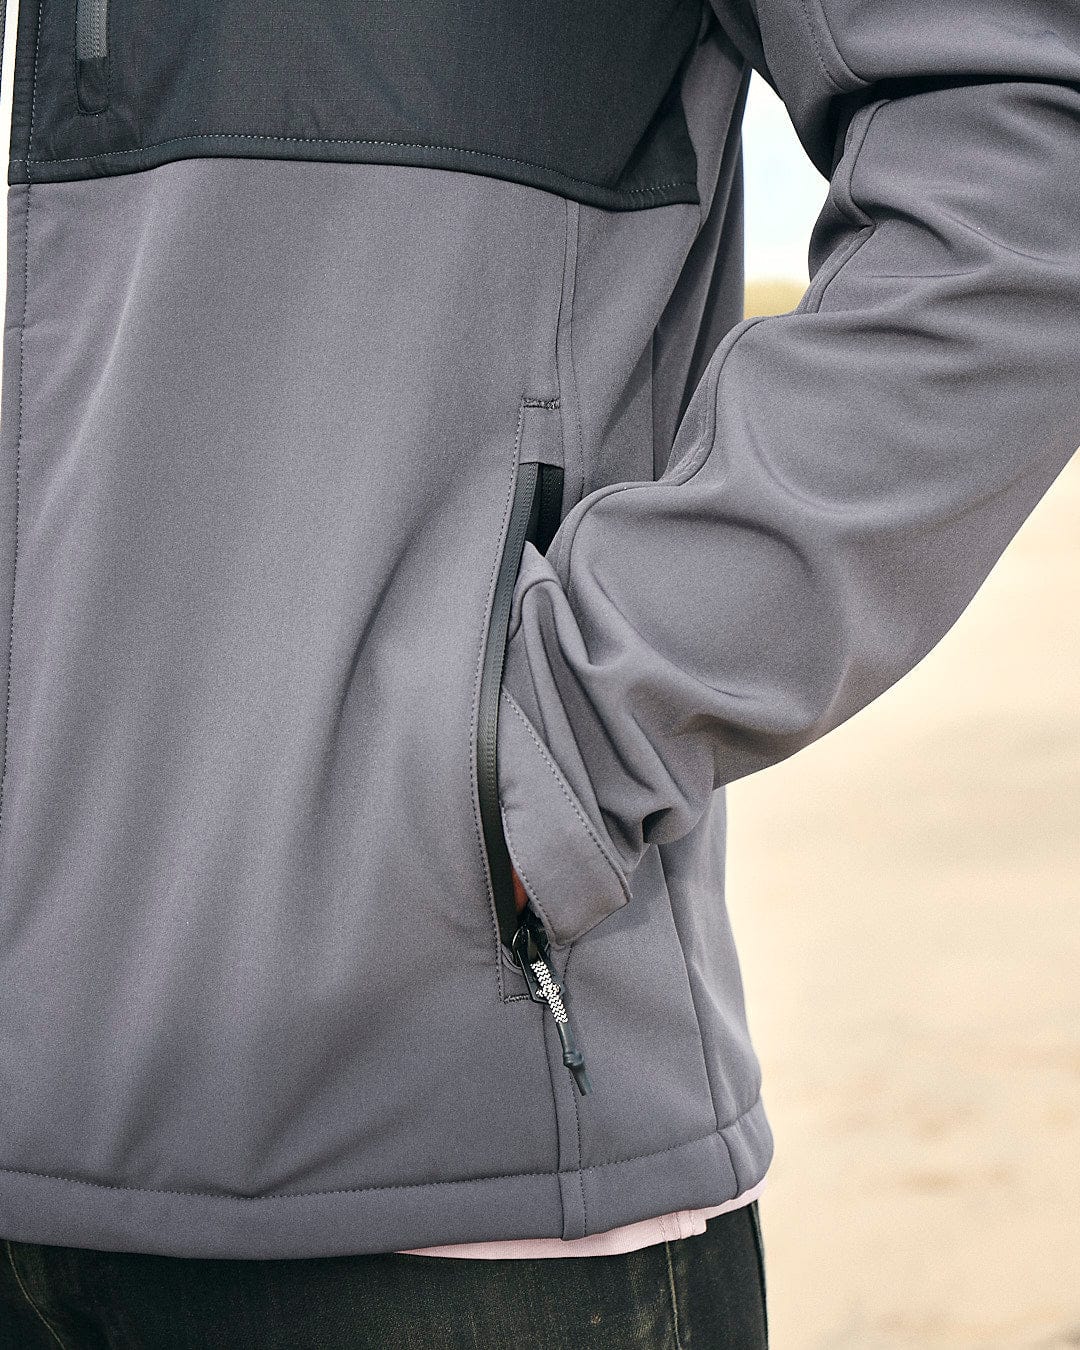 A man in a gray Saltrock Munros - Mens Softshell Jacket - Grey is standing on the beach.